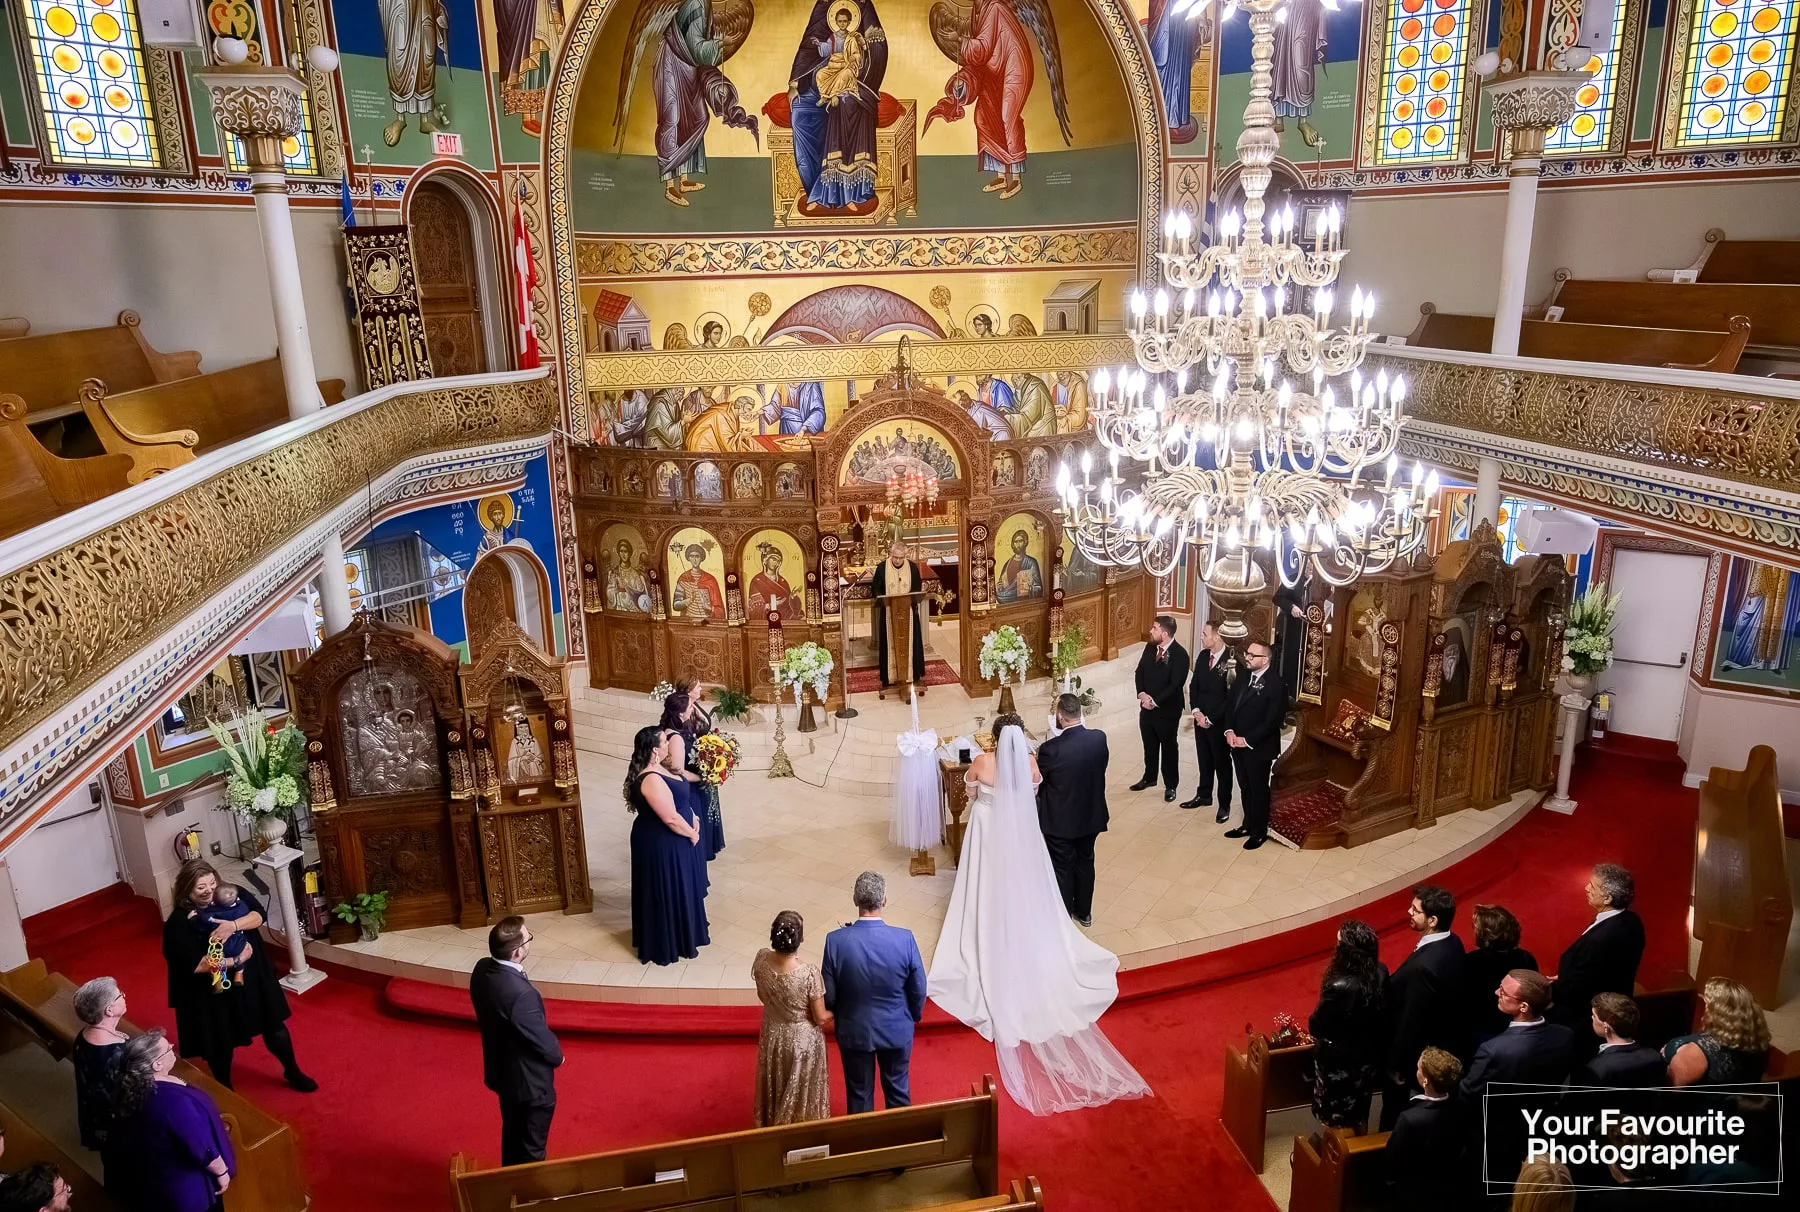 Couple getting married at St. George's Greek Orthodox Church in downtown Toronto, as seen from the balcony